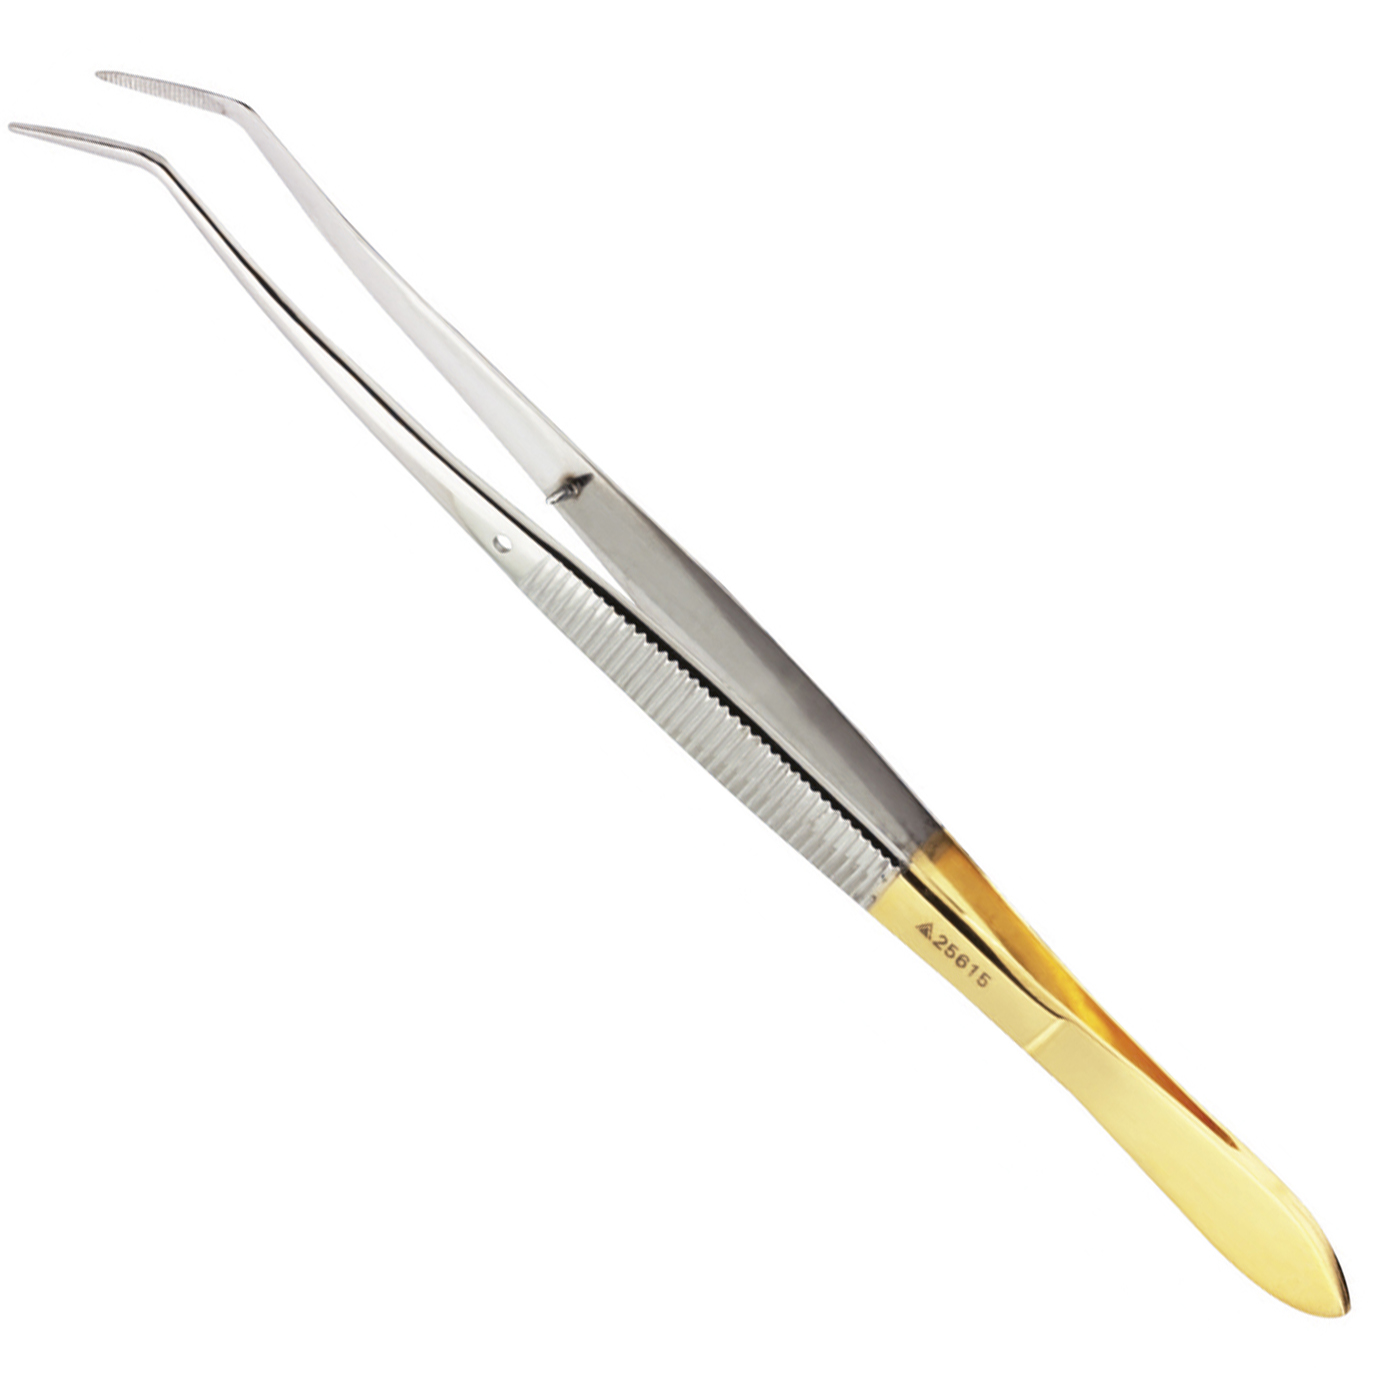 FINO Tweezers, Grooved, 160 mm, with Gold-Coloured Handle - 1 piece